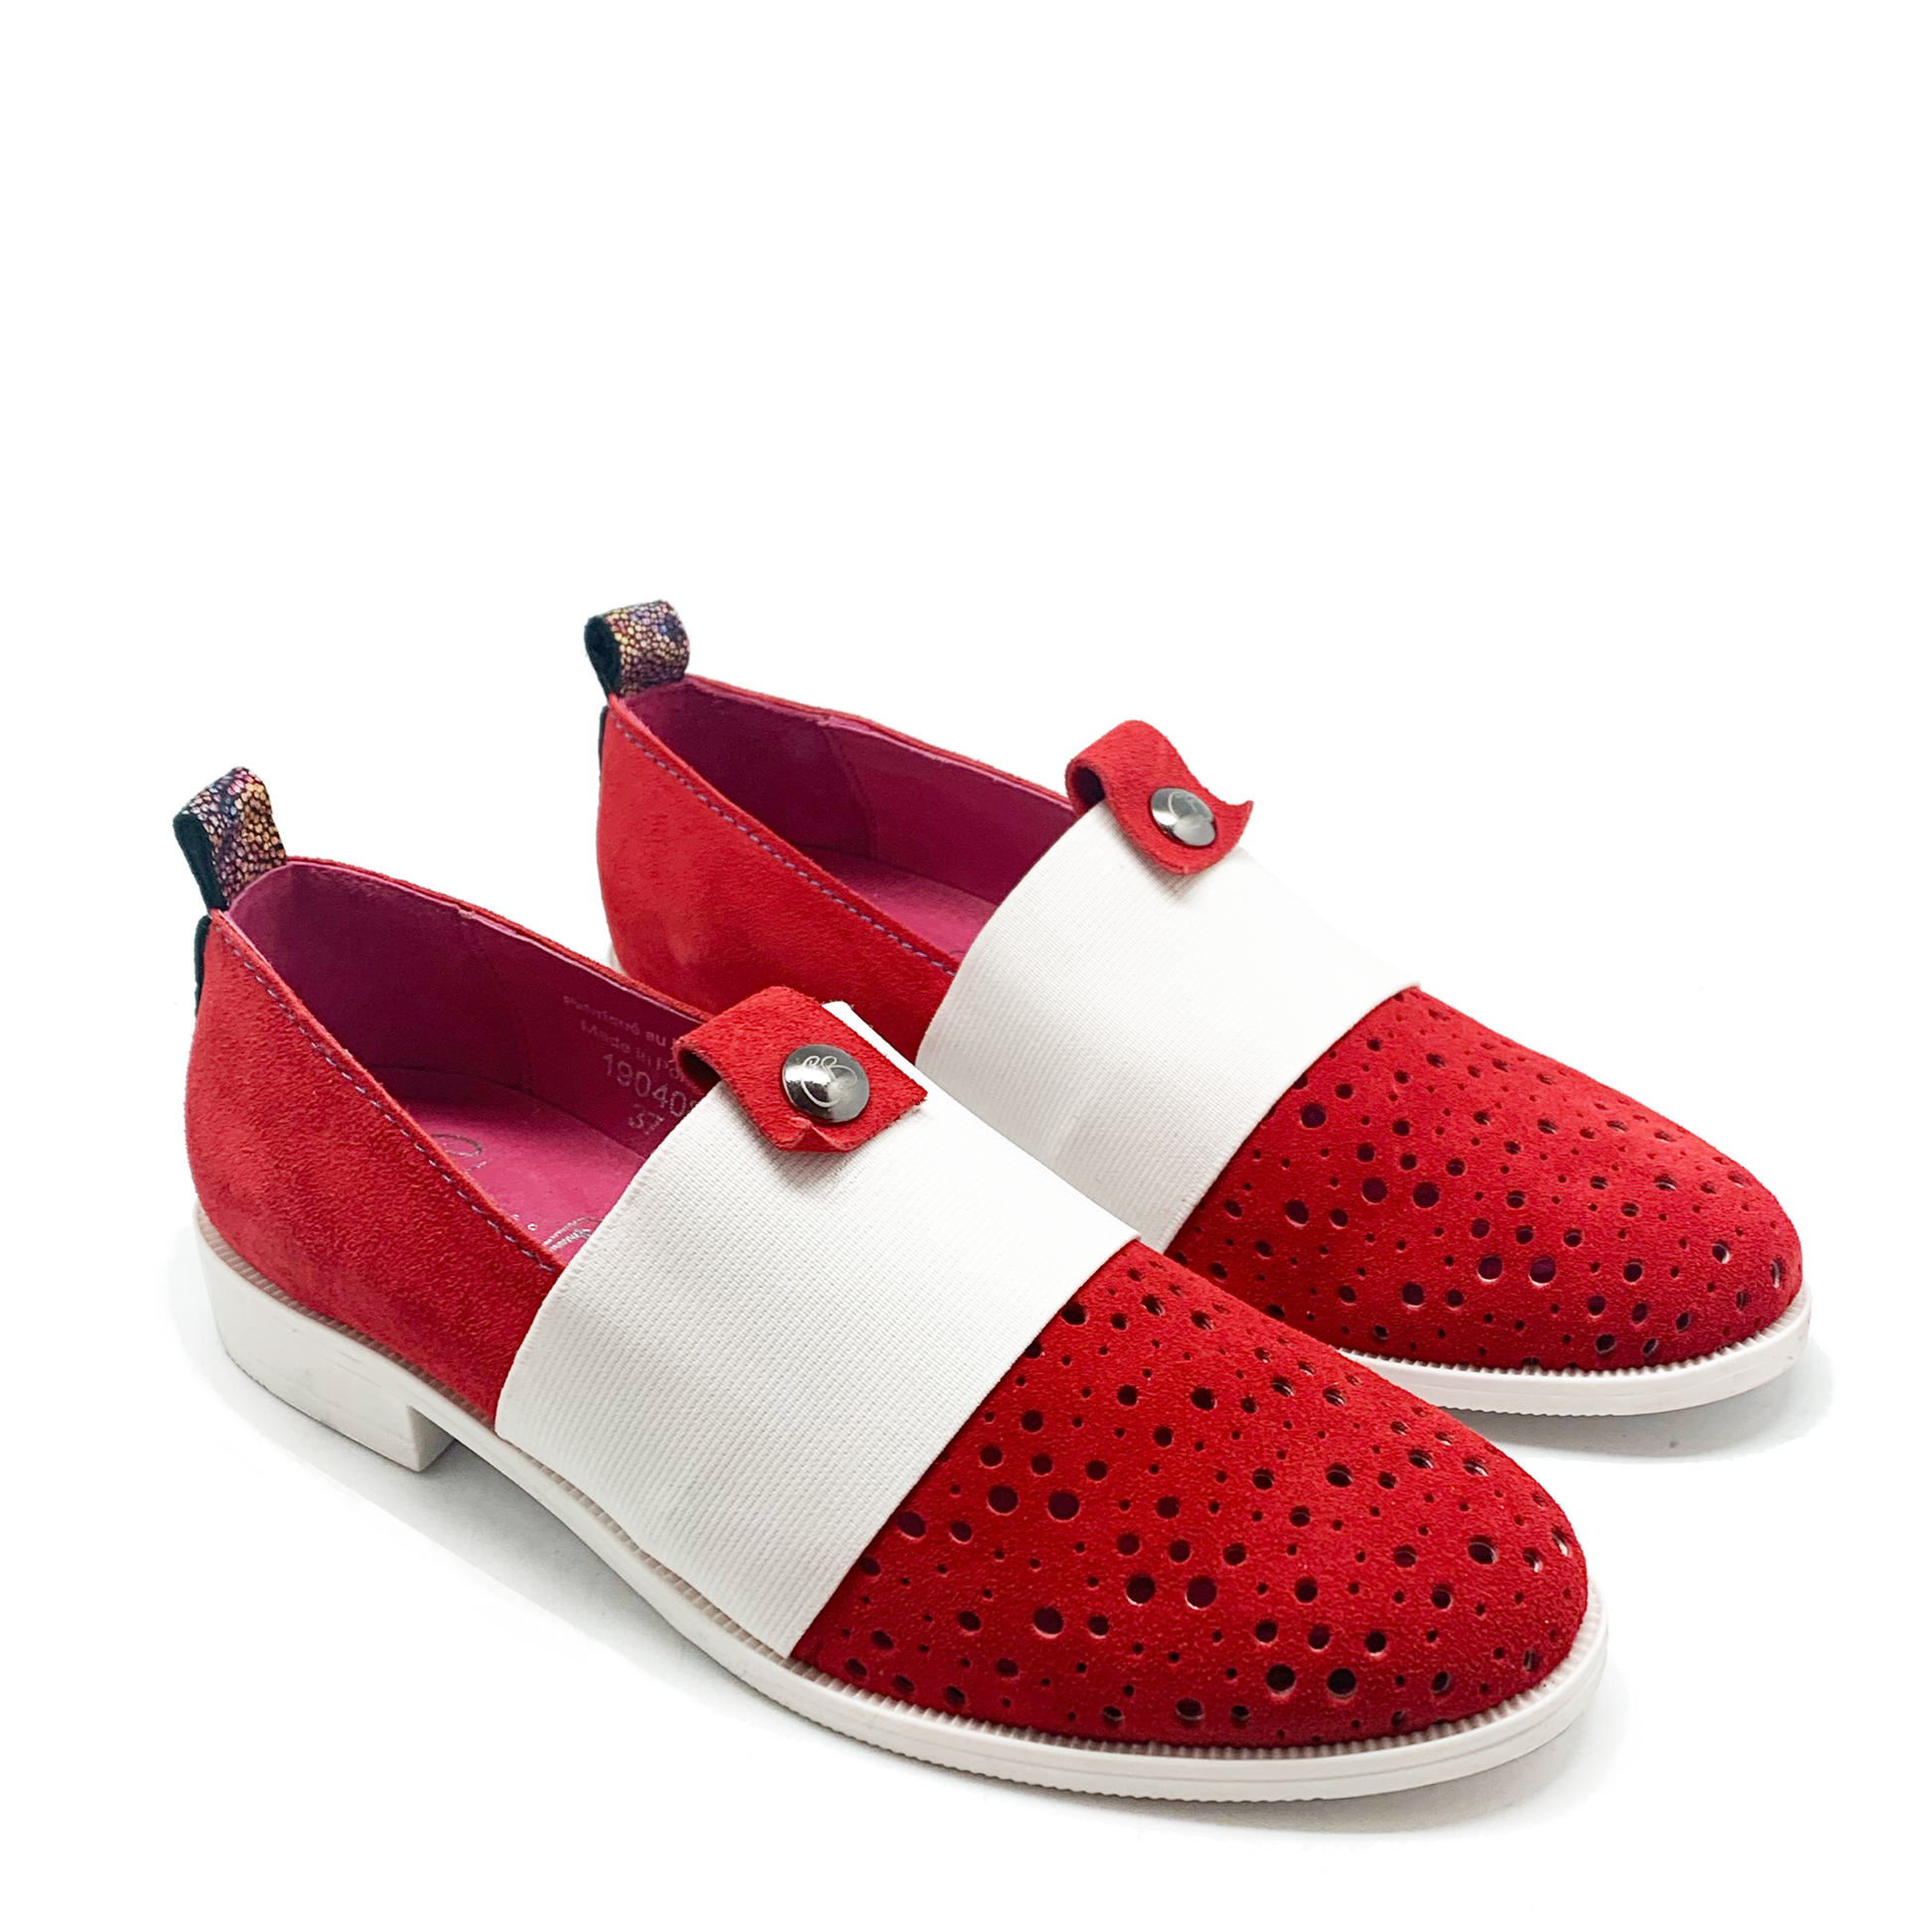 Red perforated suede slip on shoes with white elastic strap. View of both shoes.